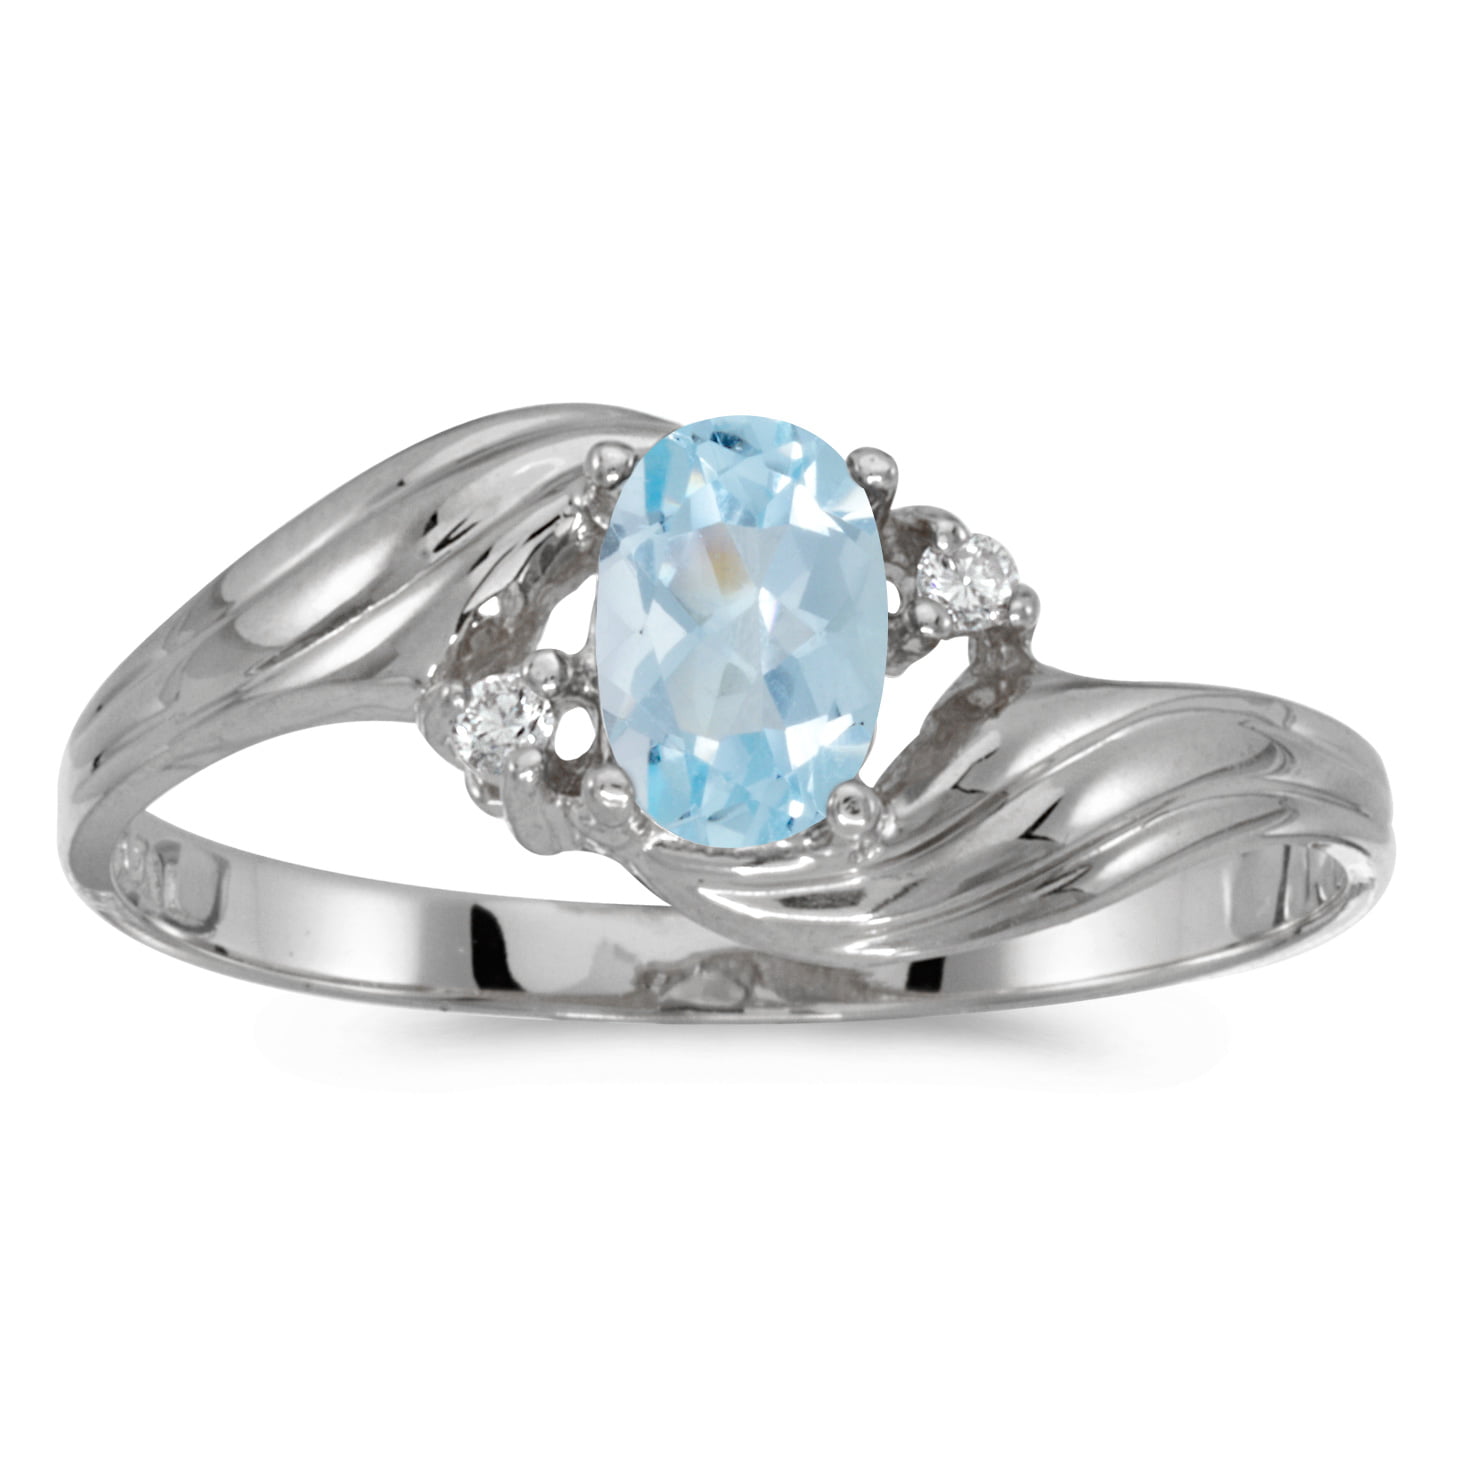 Details about   14k White Gold Oval Aquamarine And Diamond Ring 